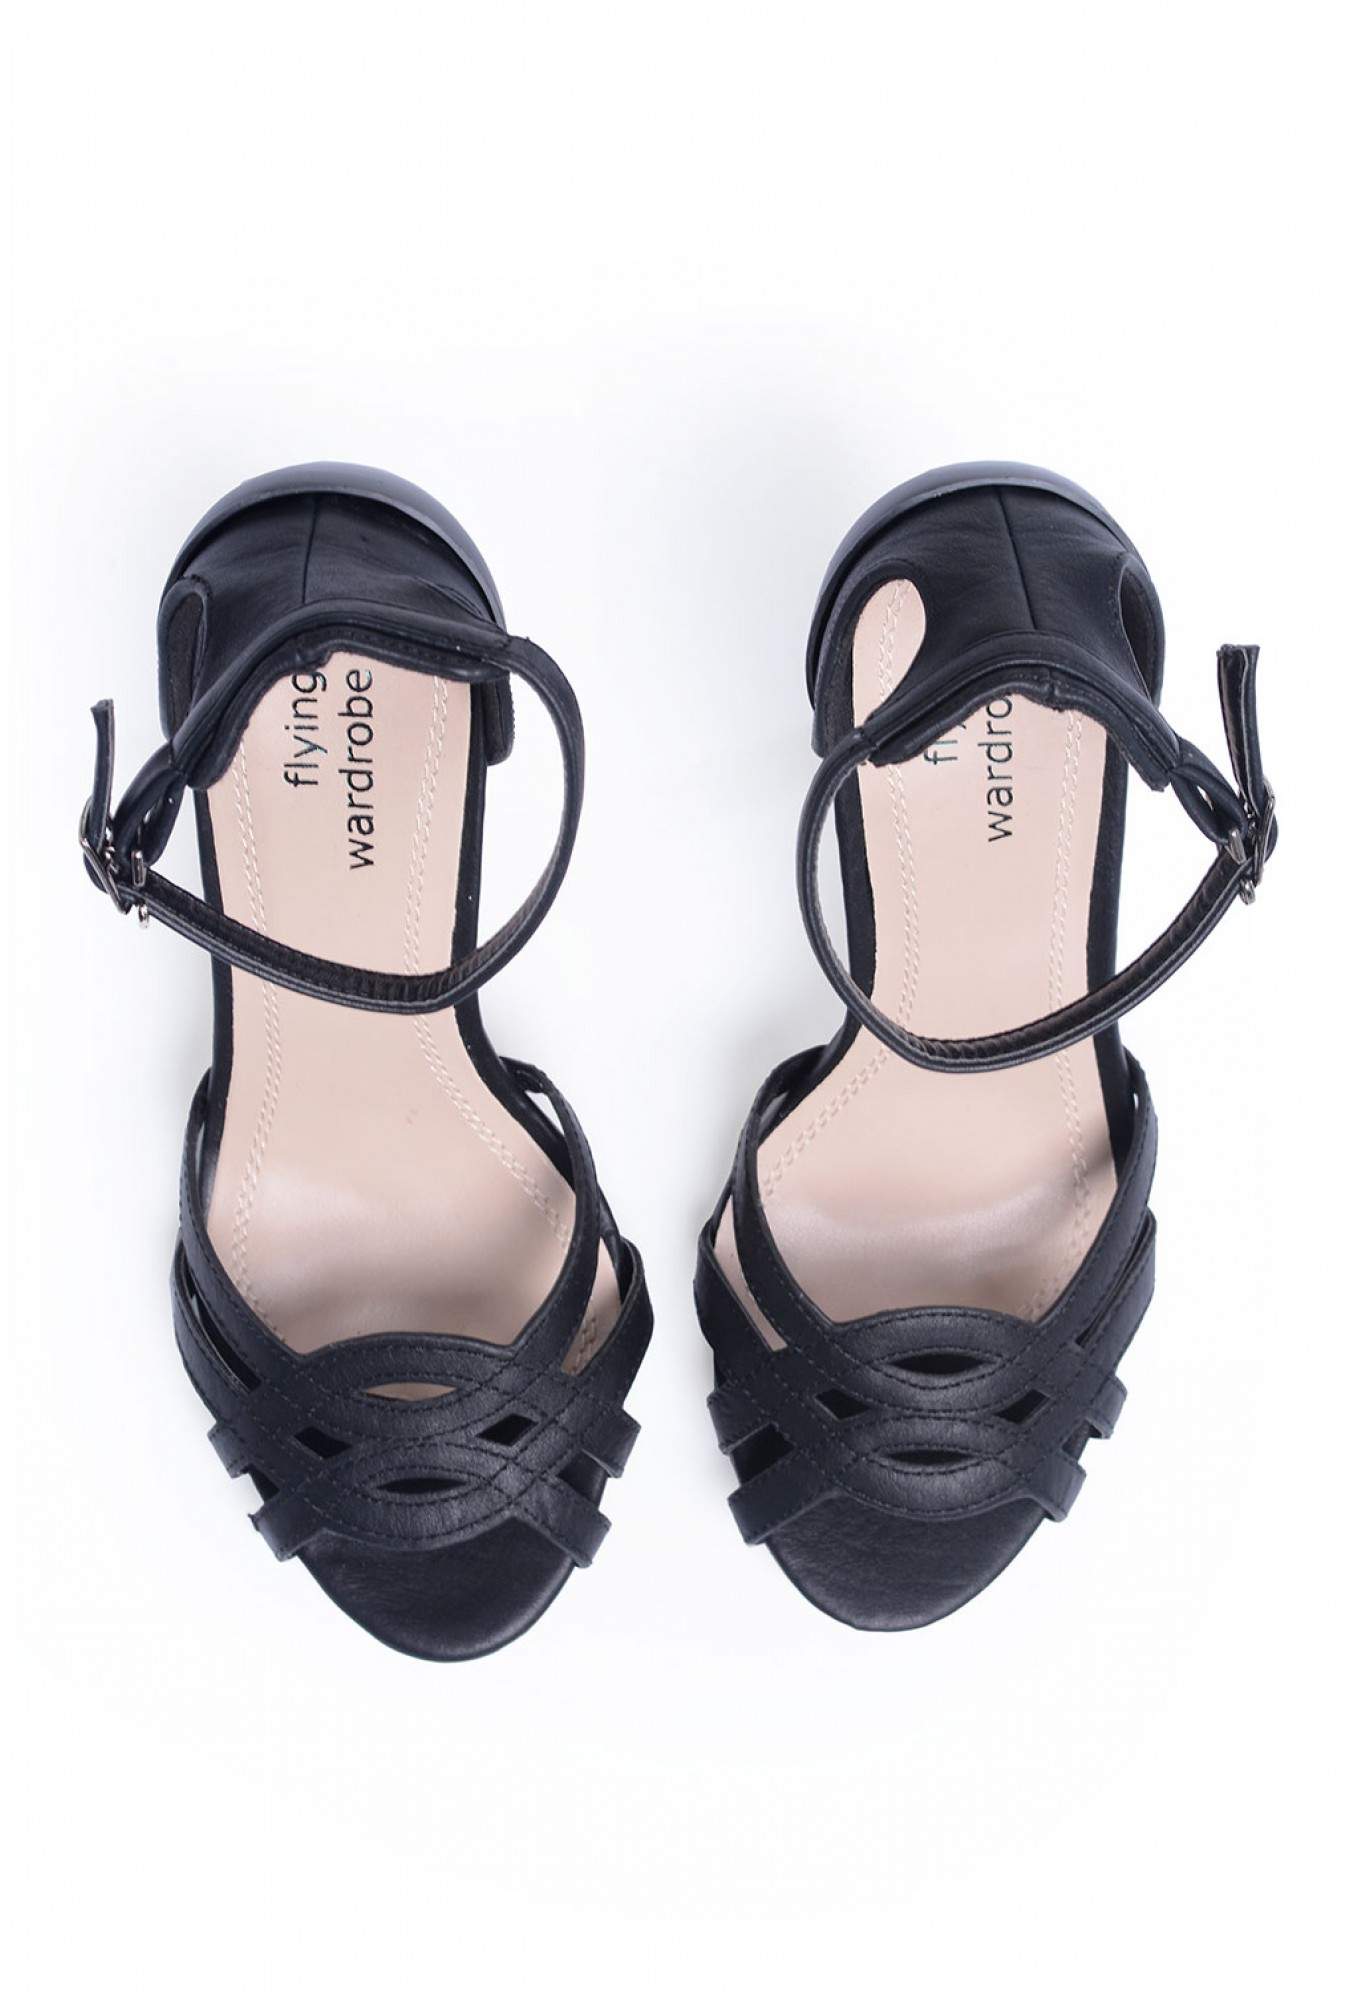 304 Marian Ankle Strap Cut out Sandals in Black | iCLOTHING